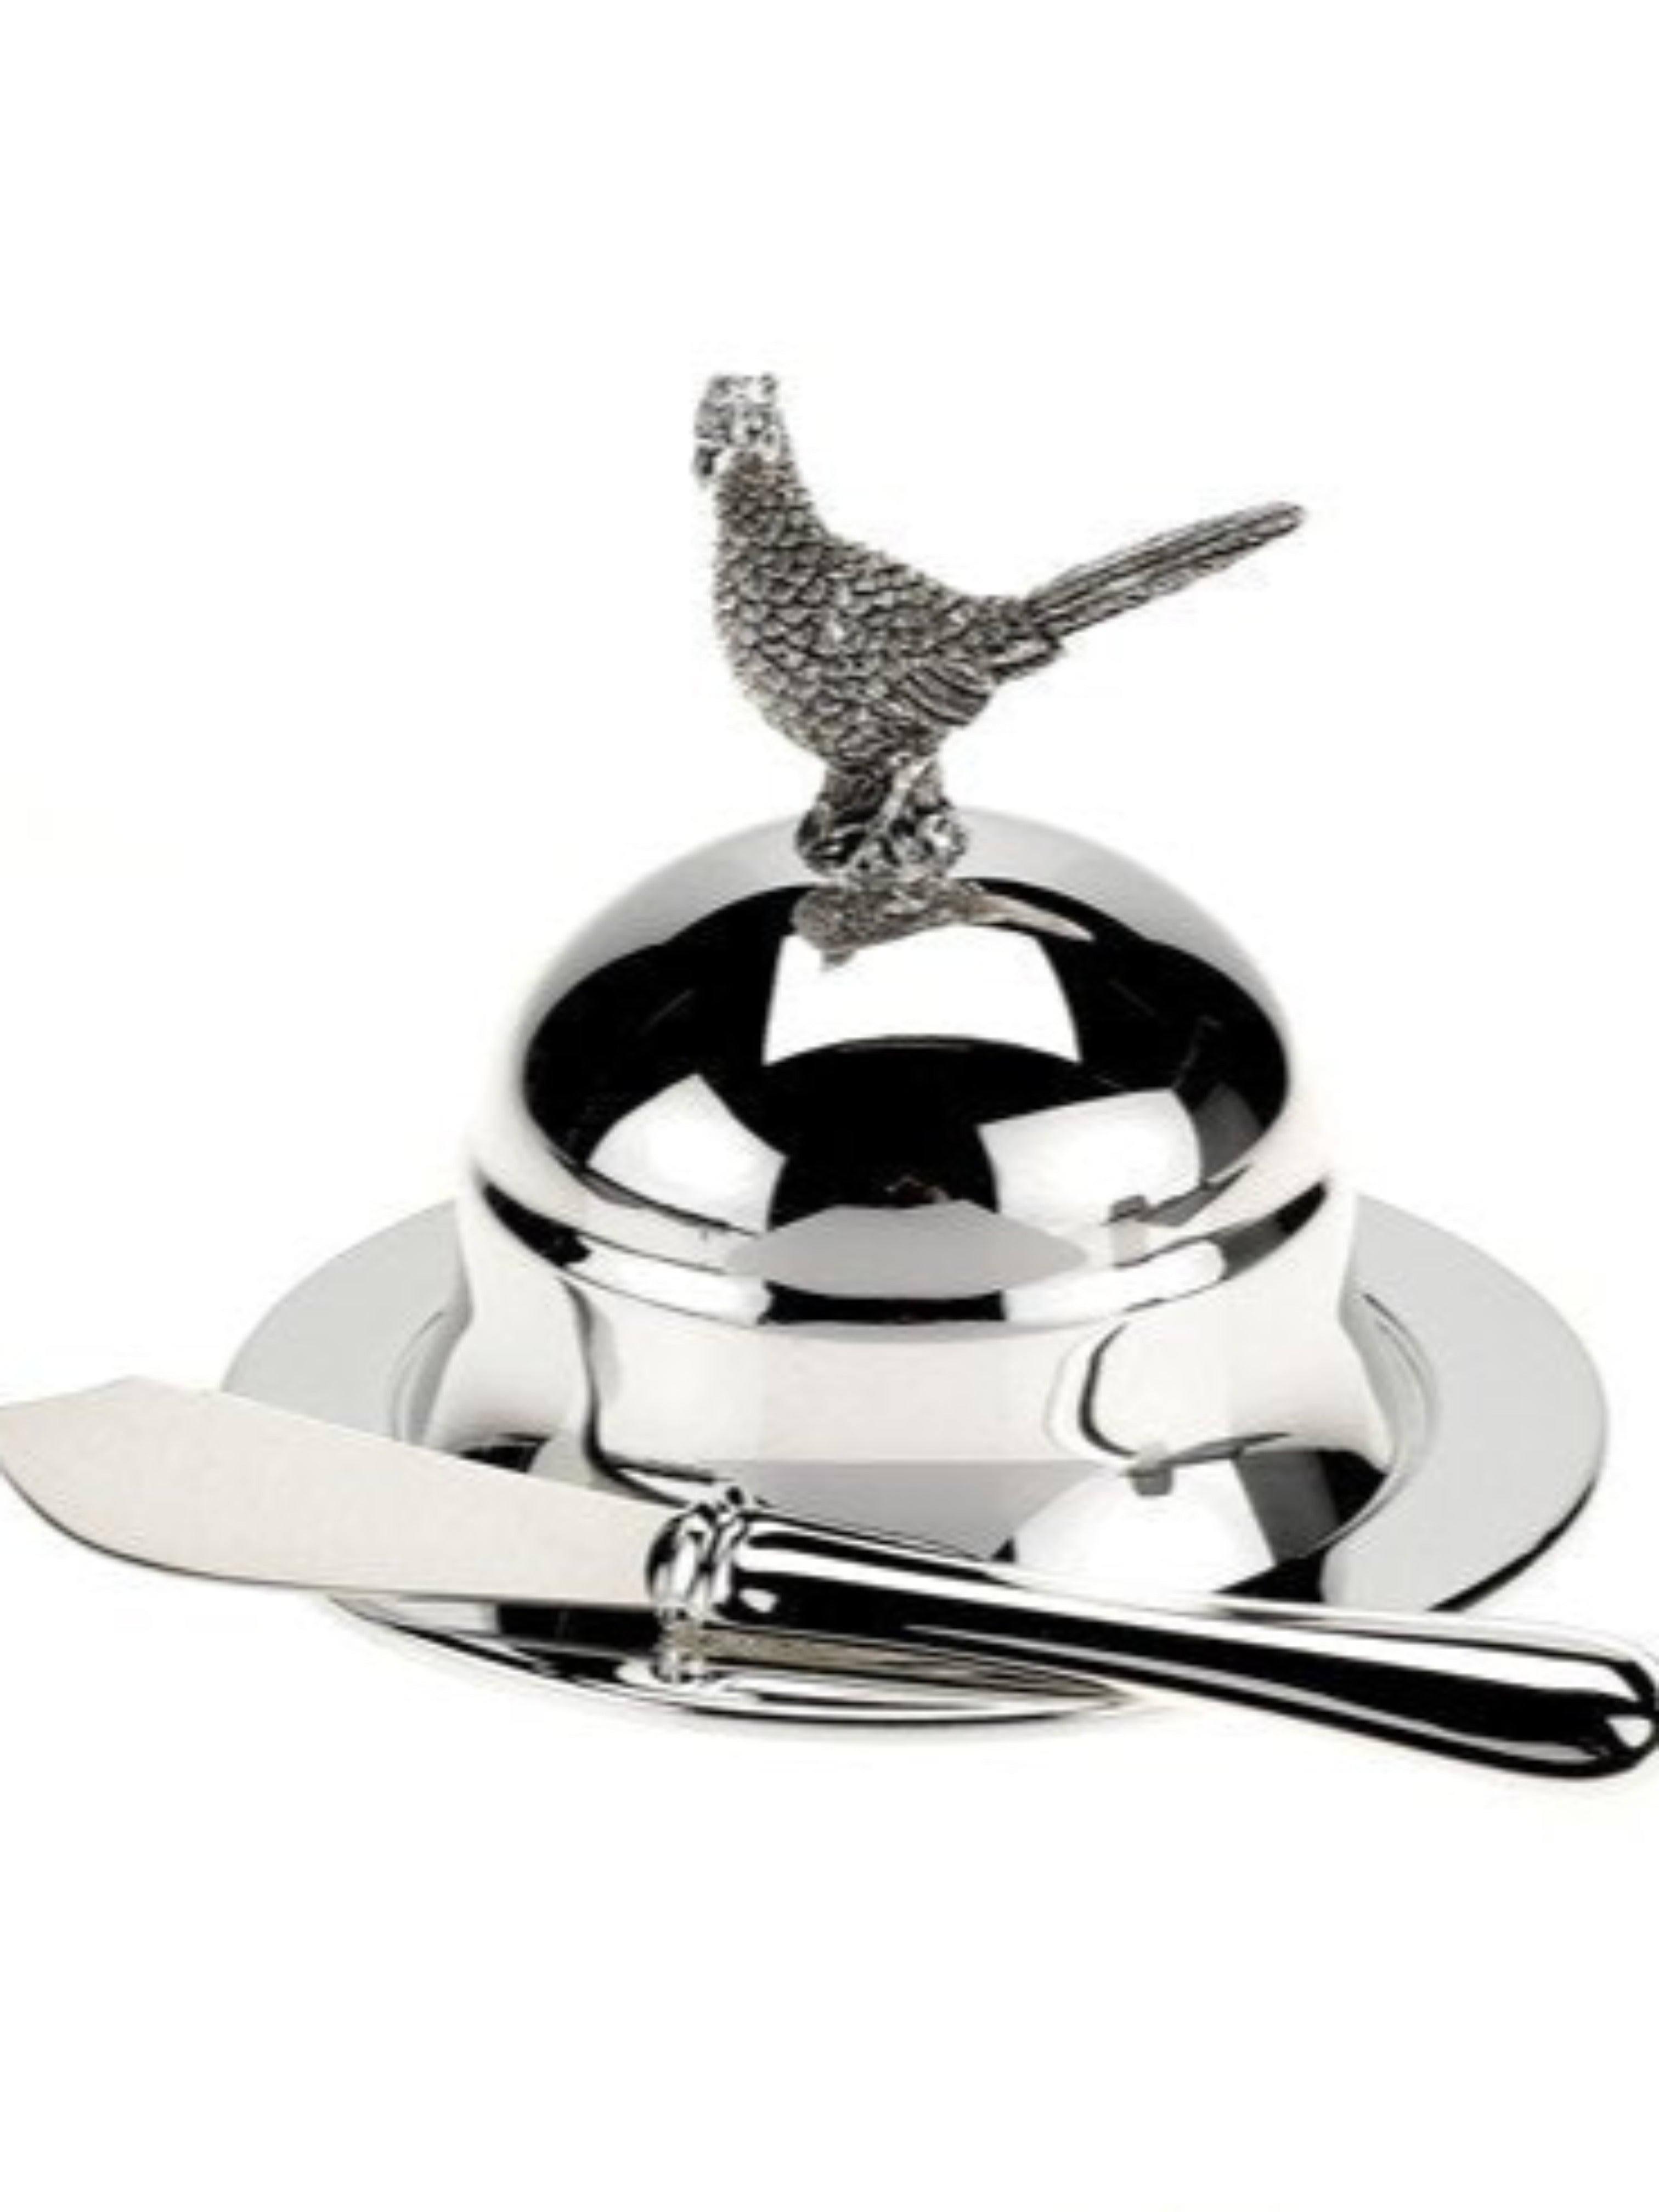 Pheasant Round Butter Dish and Spreader